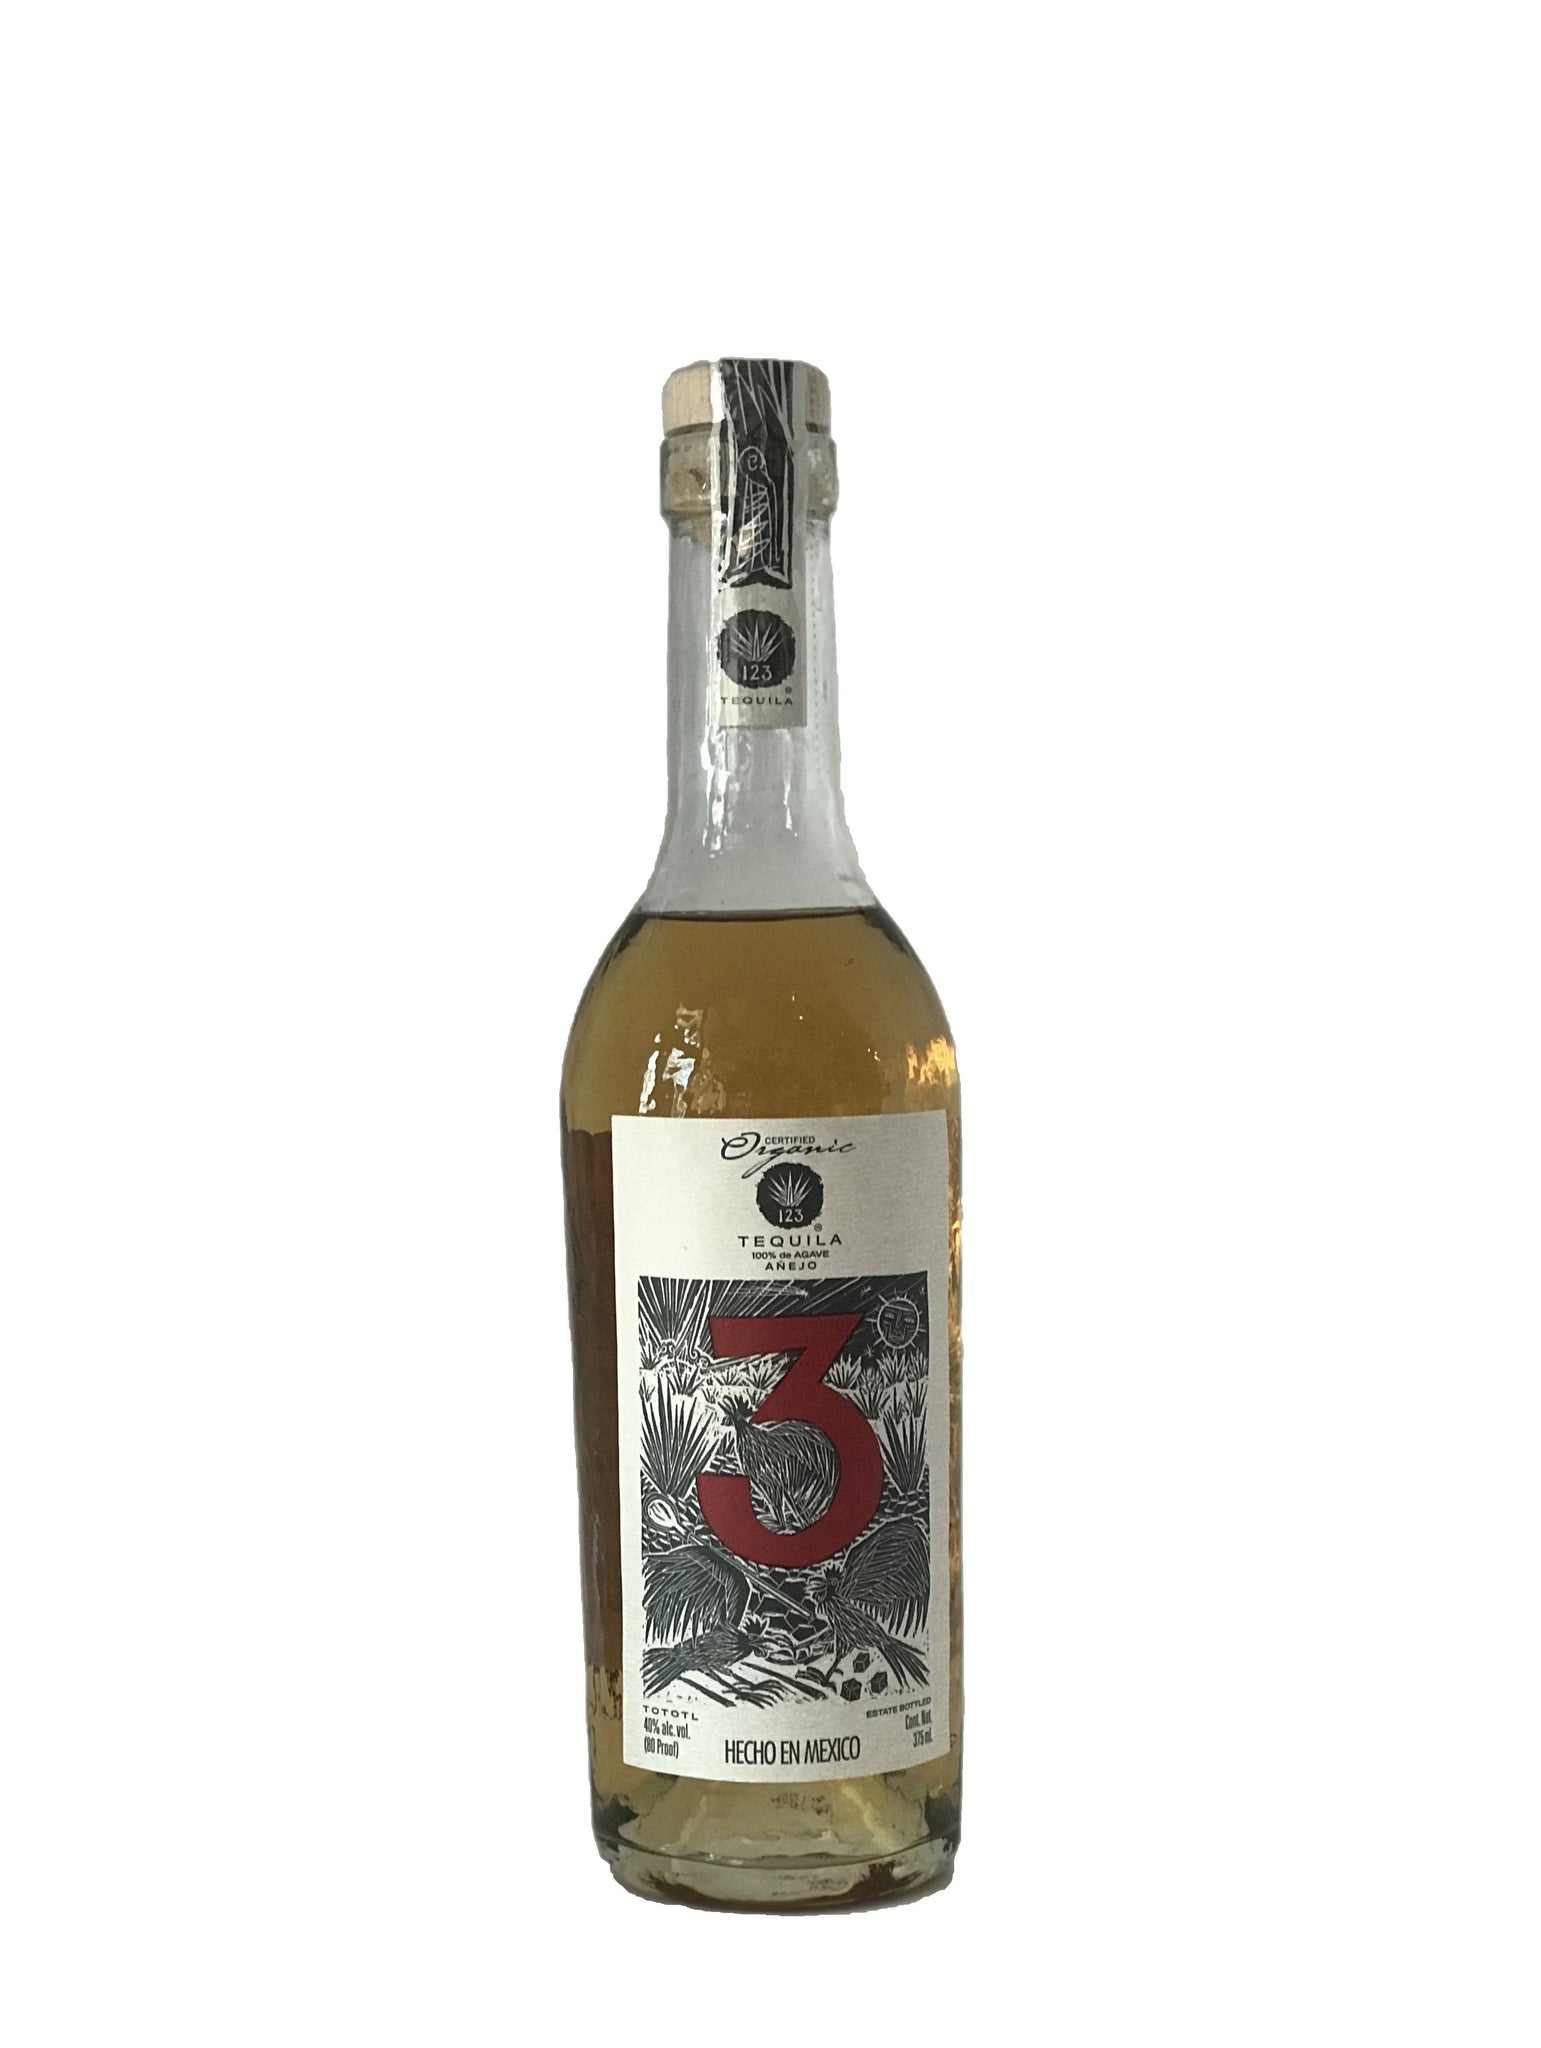 123 Tequila, Anejo "Tres" Tequila 375ml